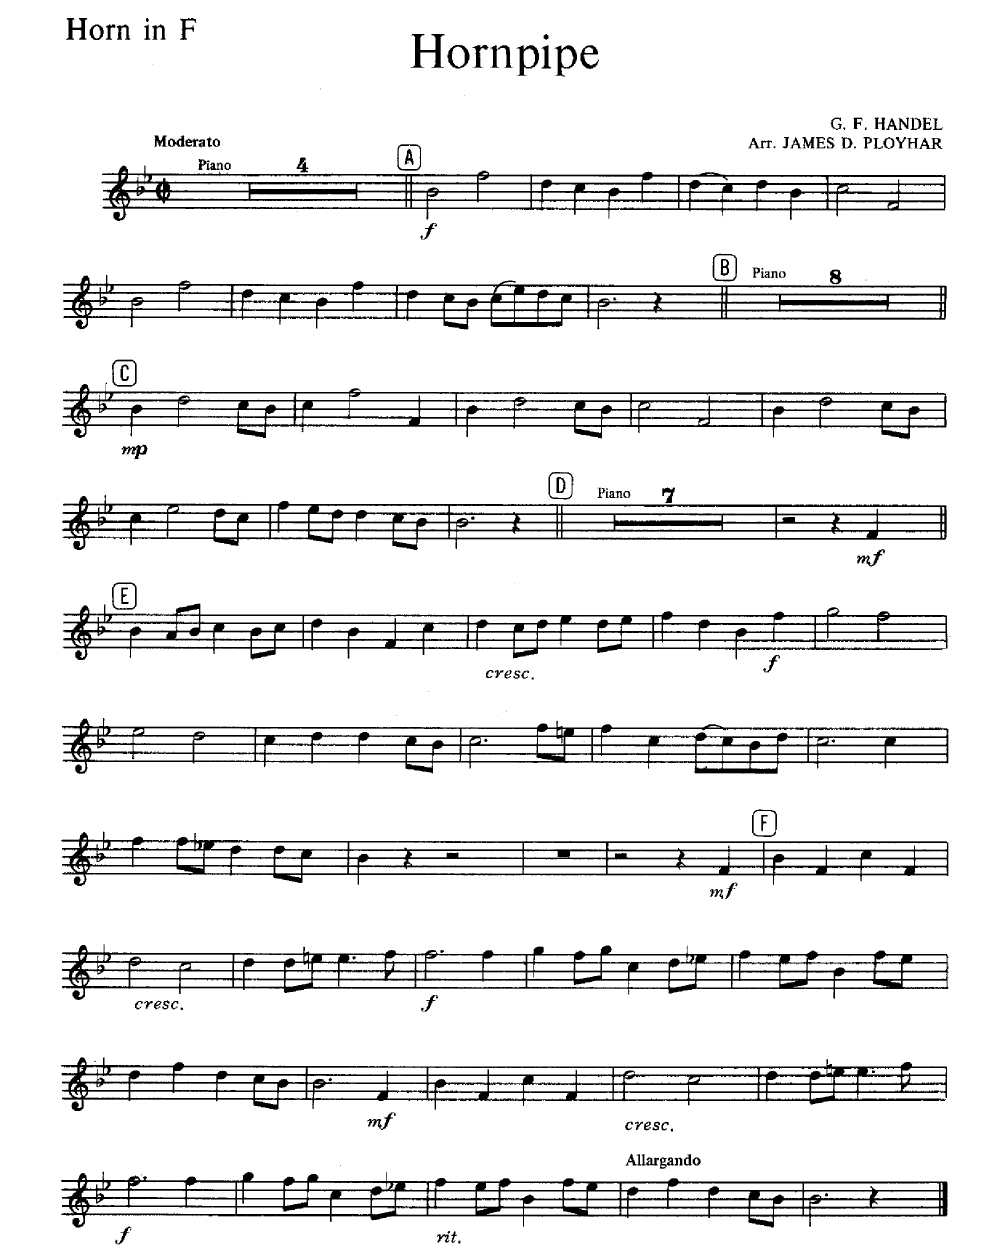 HORNPIPE FRENCH HORN SOLO